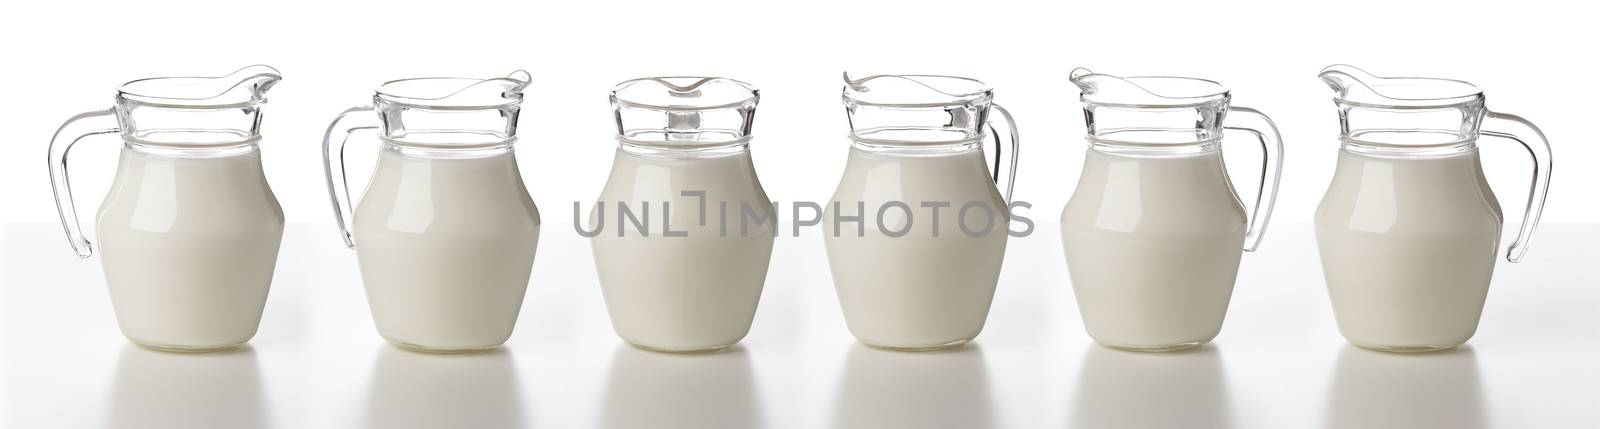 Glass jug of milk isolated on white background, cream or milk pitcher, collection